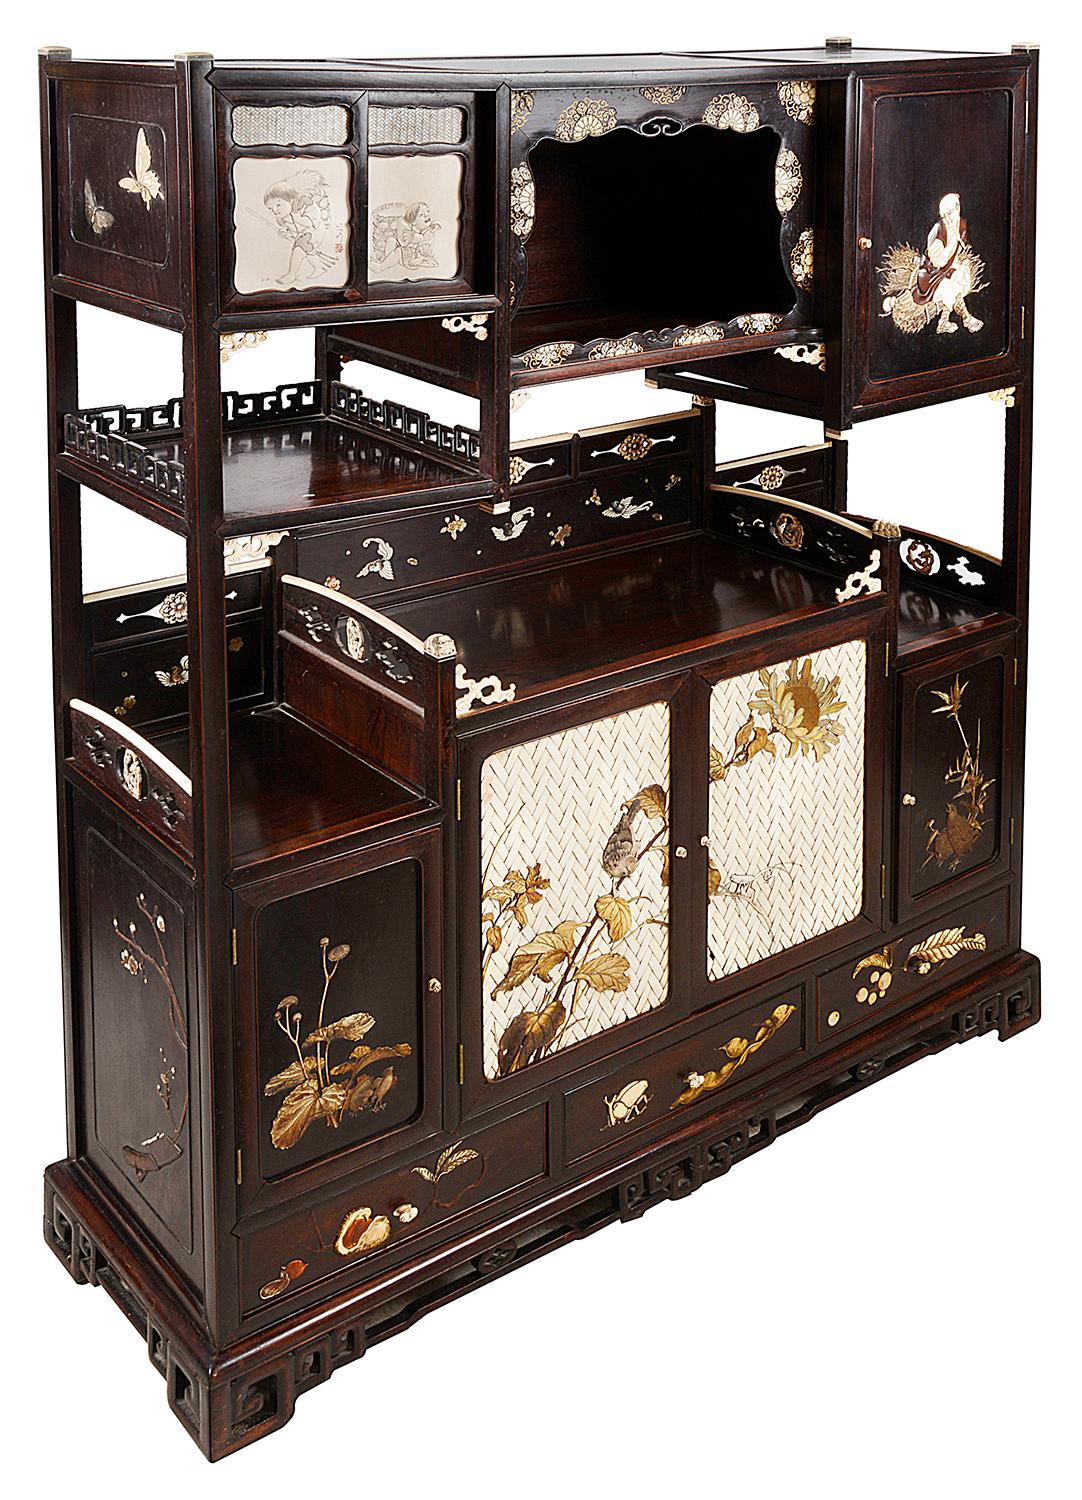 A Japanese hardwood shodana with inlaid and lacquer decoration, Meiji Period 1868-1912, by Shoso Kosen, bearing two character signature and red seal, with various shelves, cupboards, recesses and drawers inlaid in ivory, bone, mother of pearl and